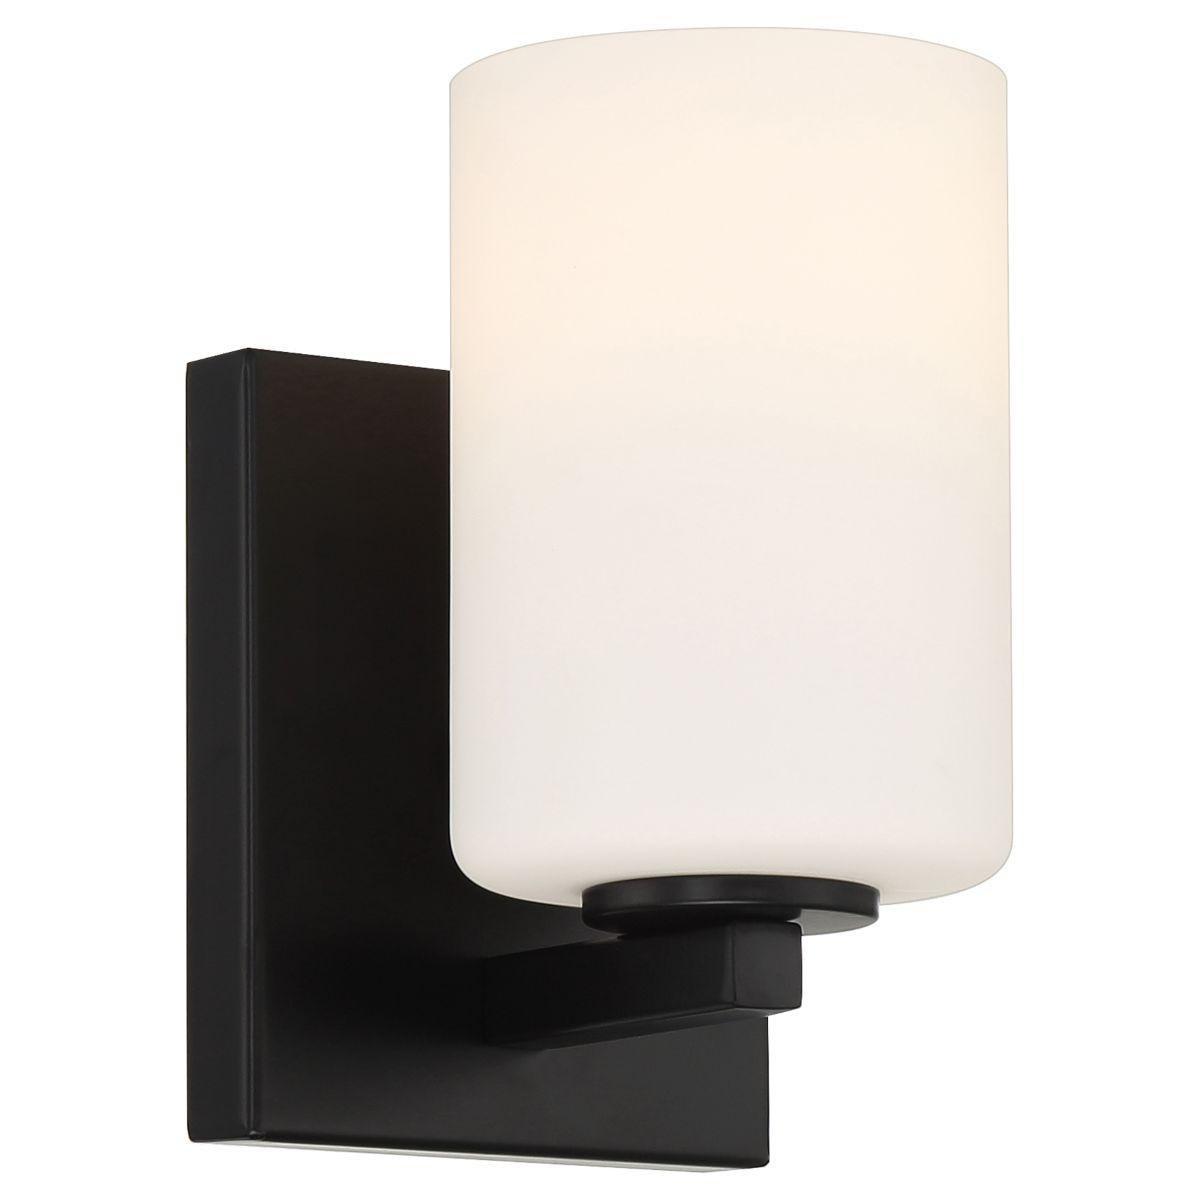 Sienna 7 in. LED Armed Sconce - Bees Lighting